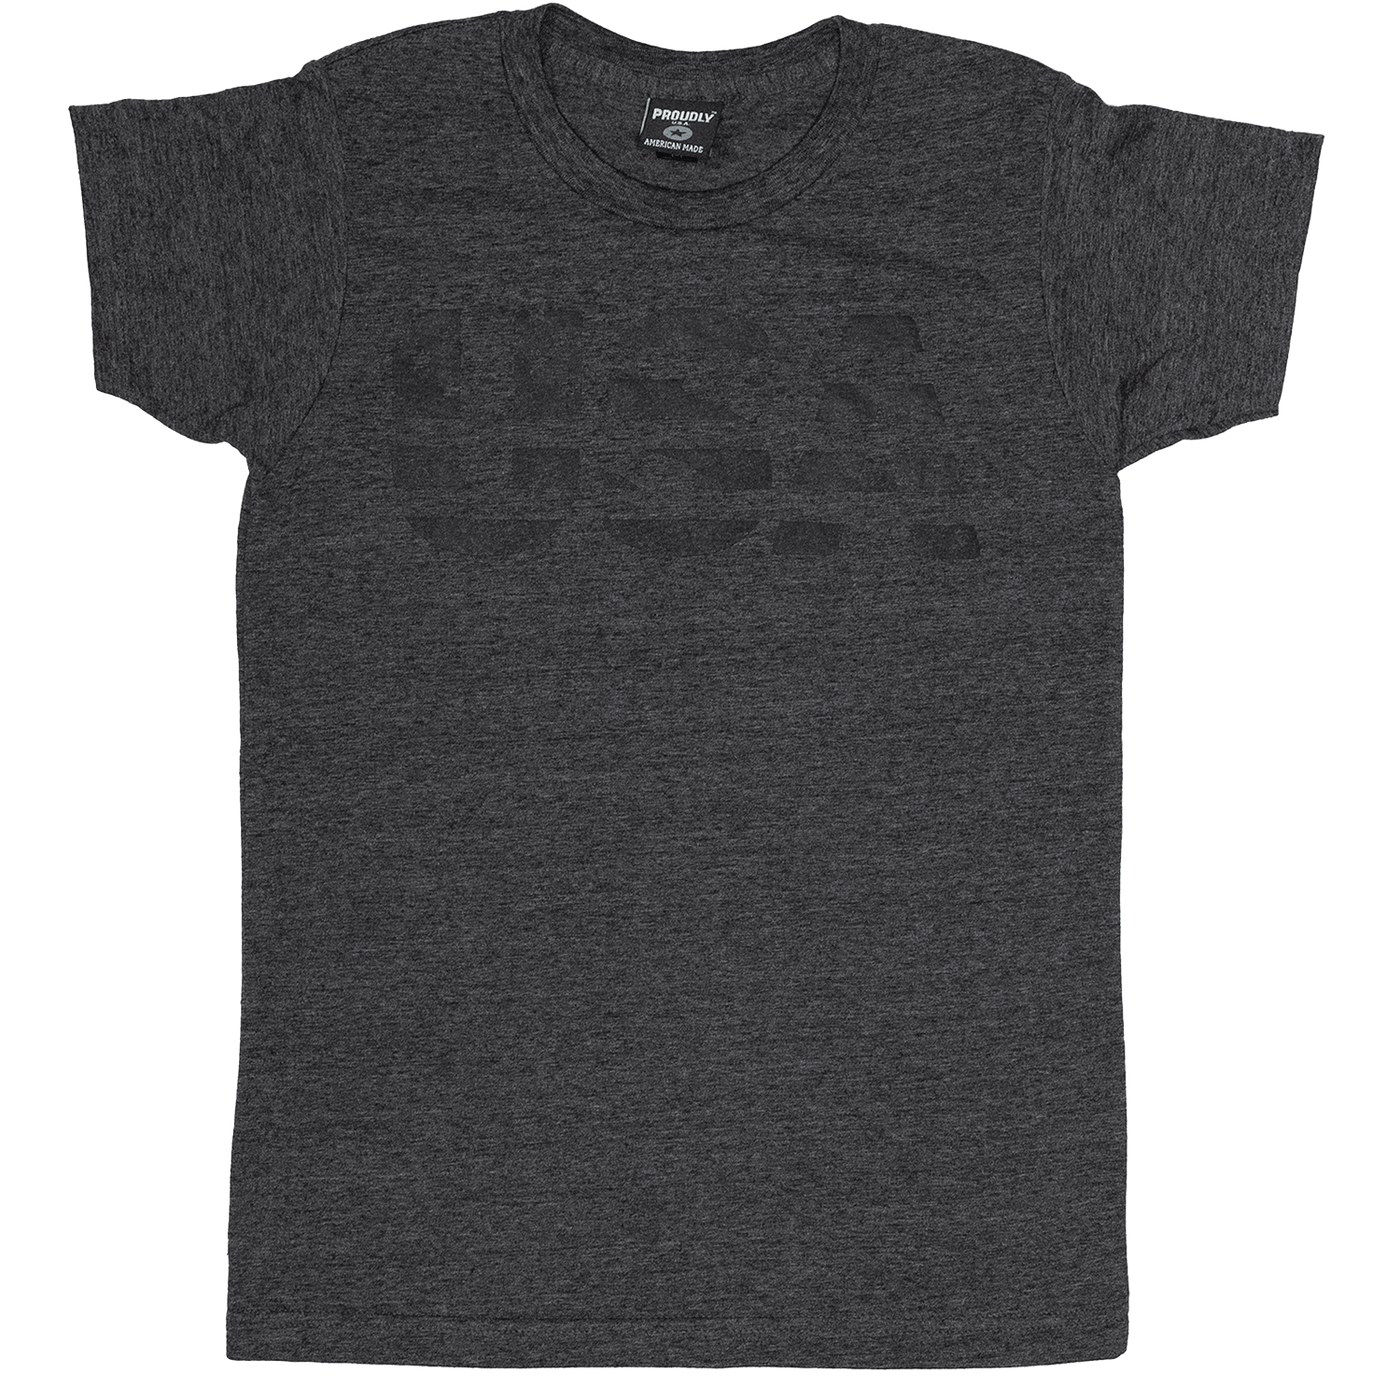 Women's heather charcoal tri-blend t-shirt with subtle black-on-charcoal USA graphic on chest